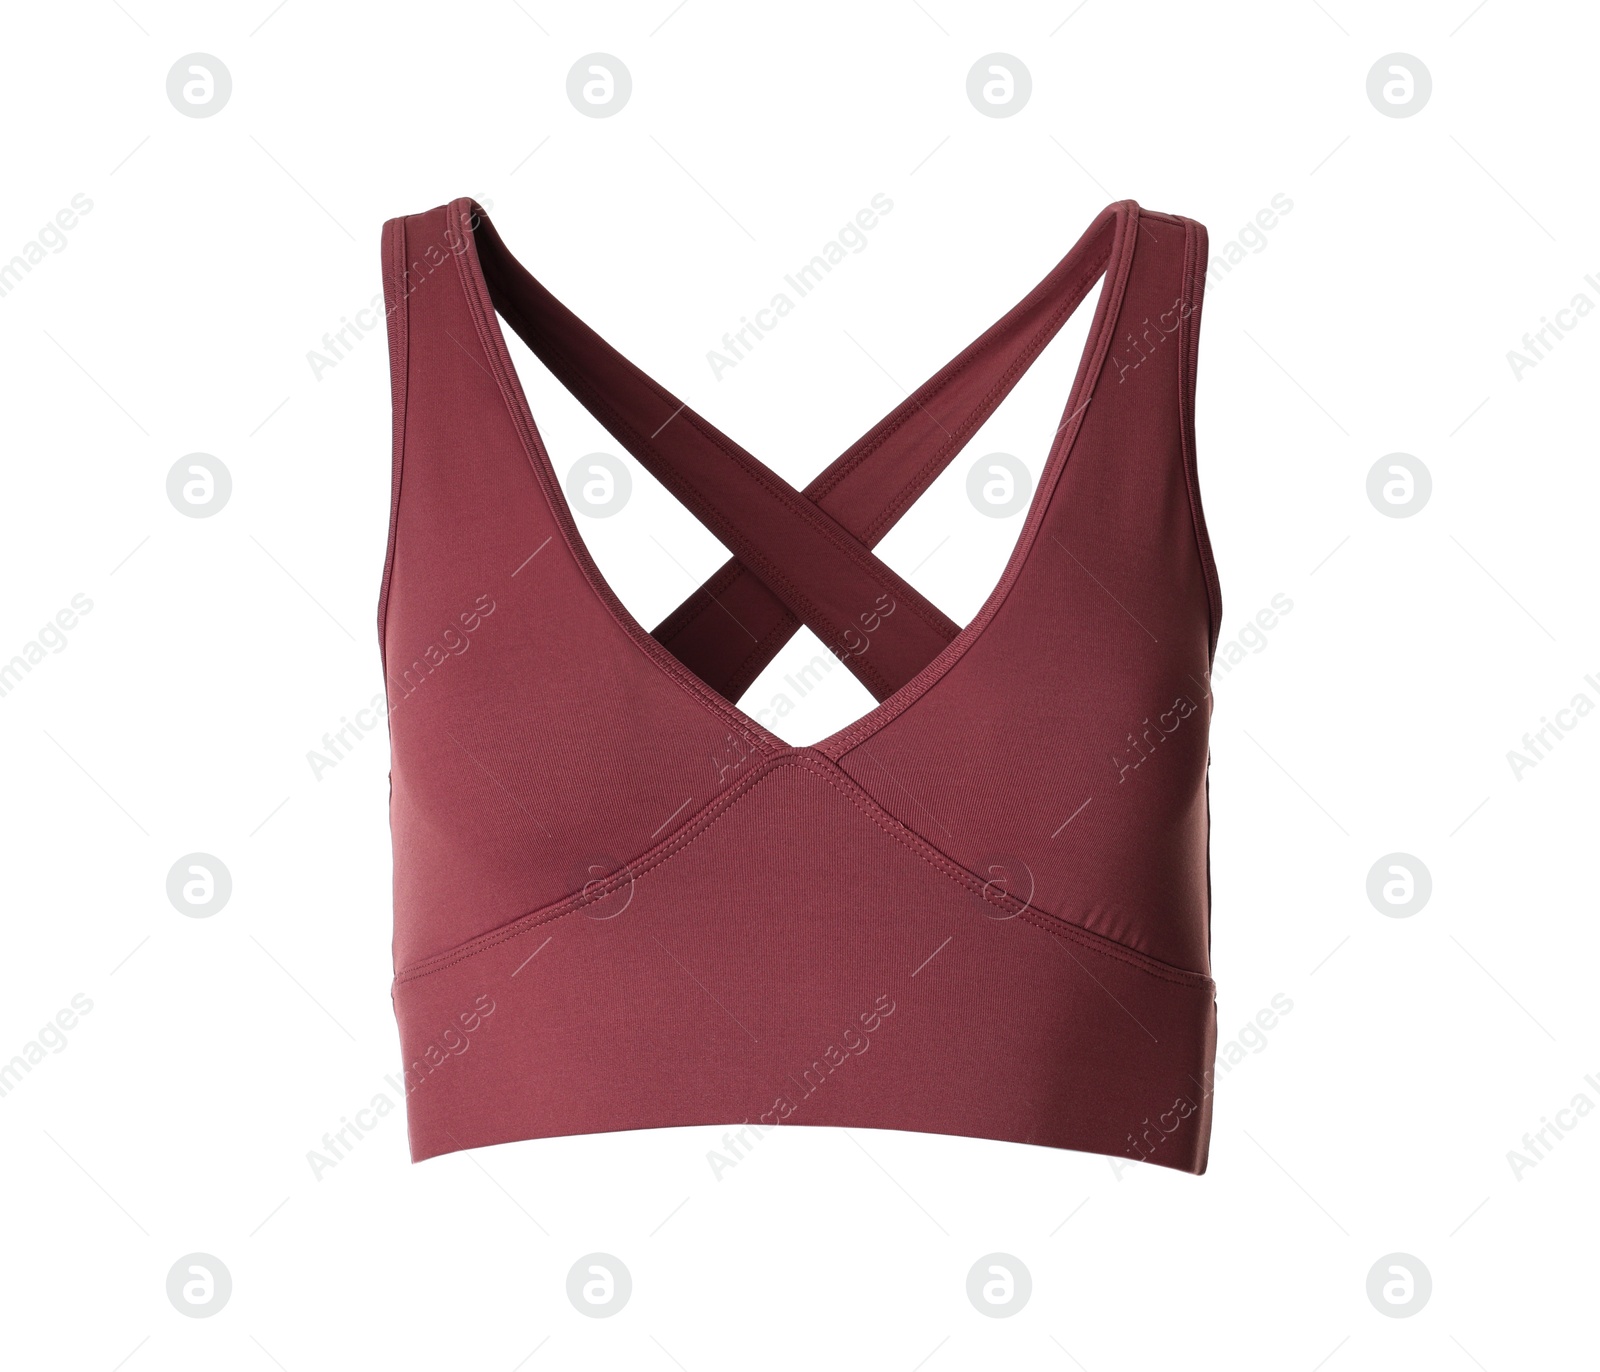 Photo of Pale red women's top isolated on white. Sports clothing